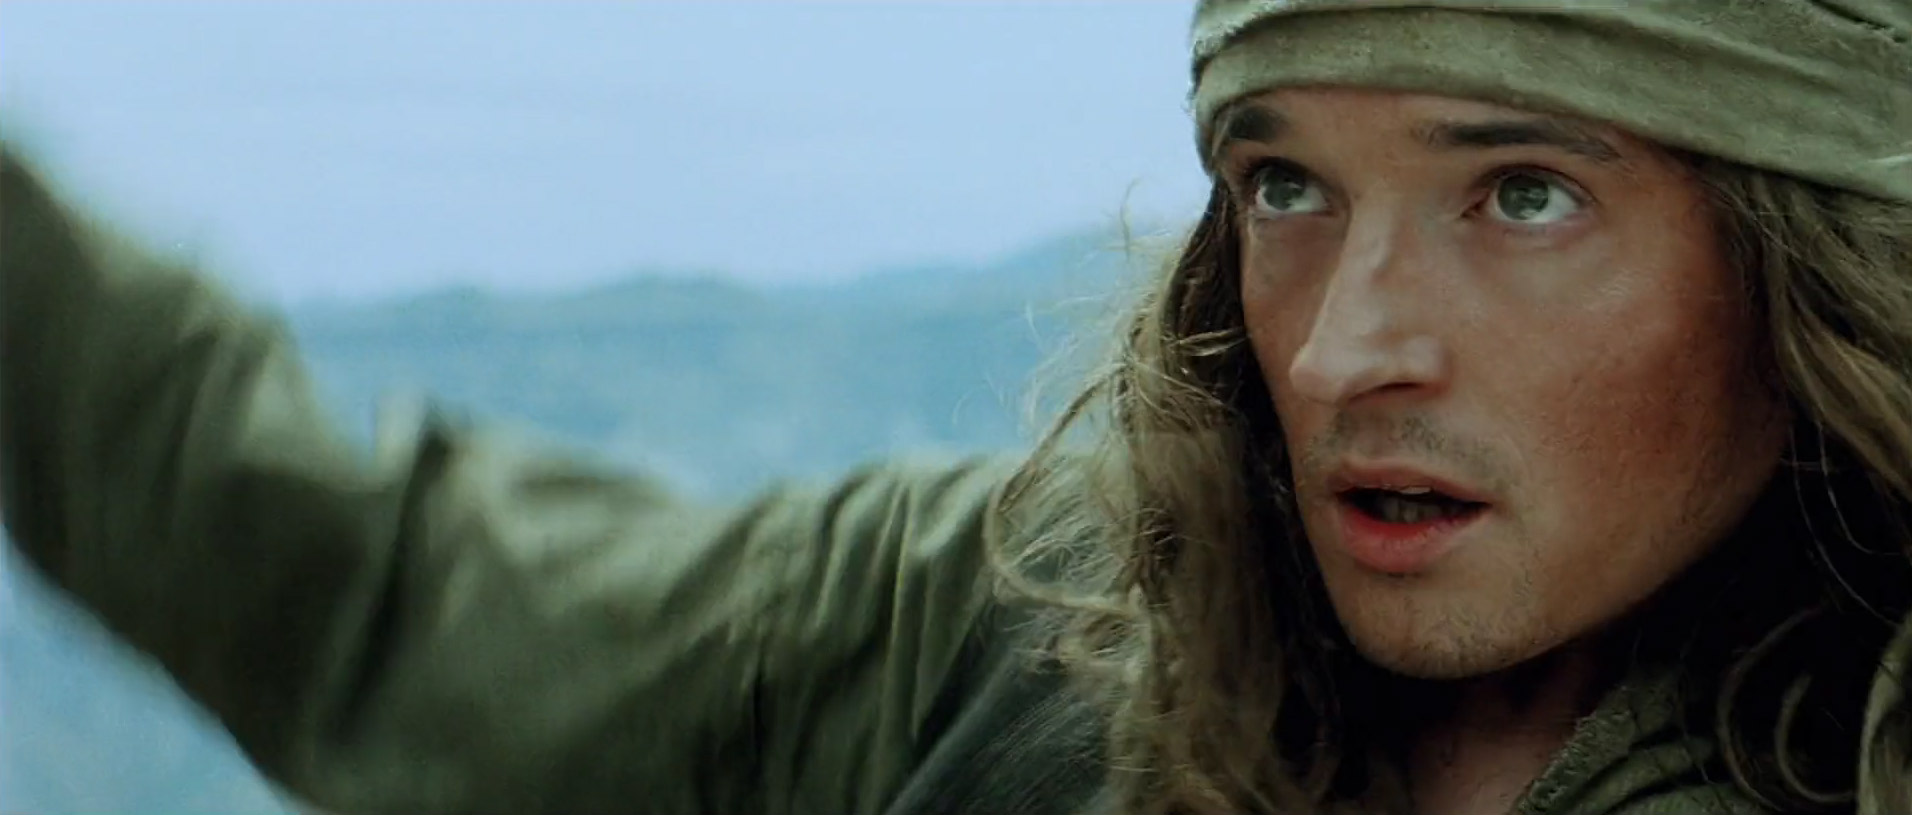 Hugh O'Conor as Young Mike Blueberry in Blueberry (2004) .